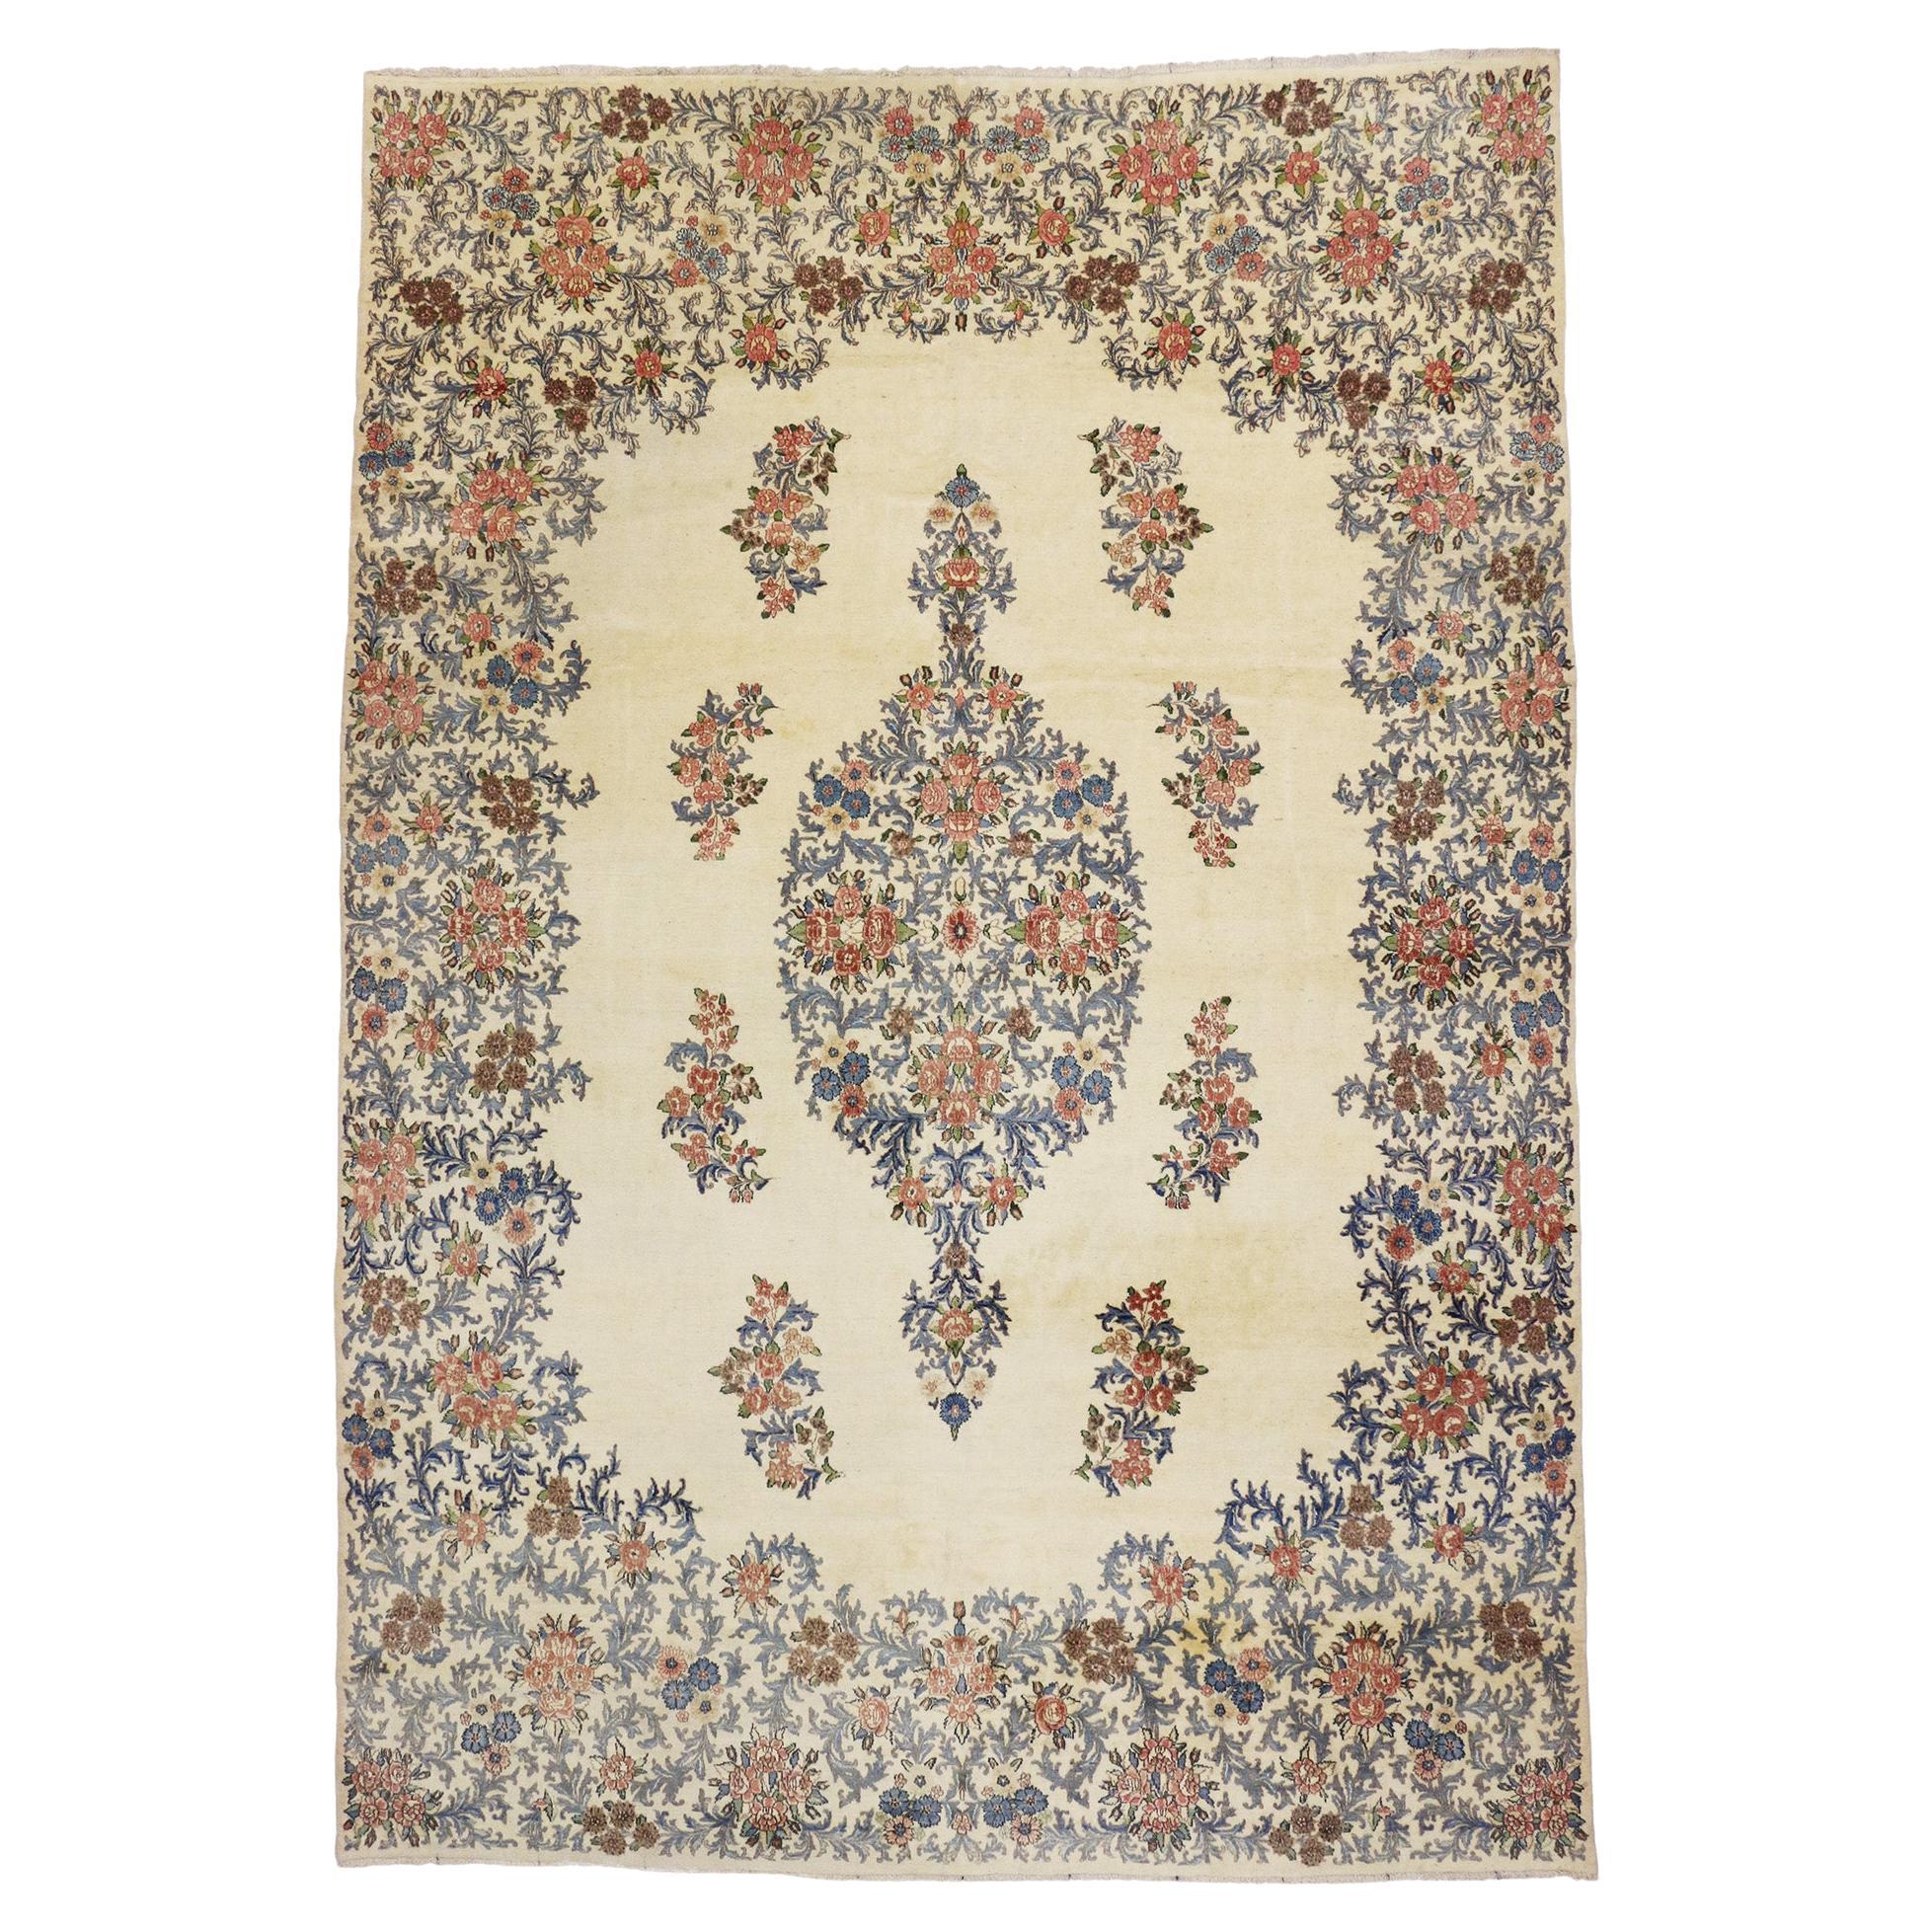 Antique Kerman Persian Rug with Traditional Style in Light Colors